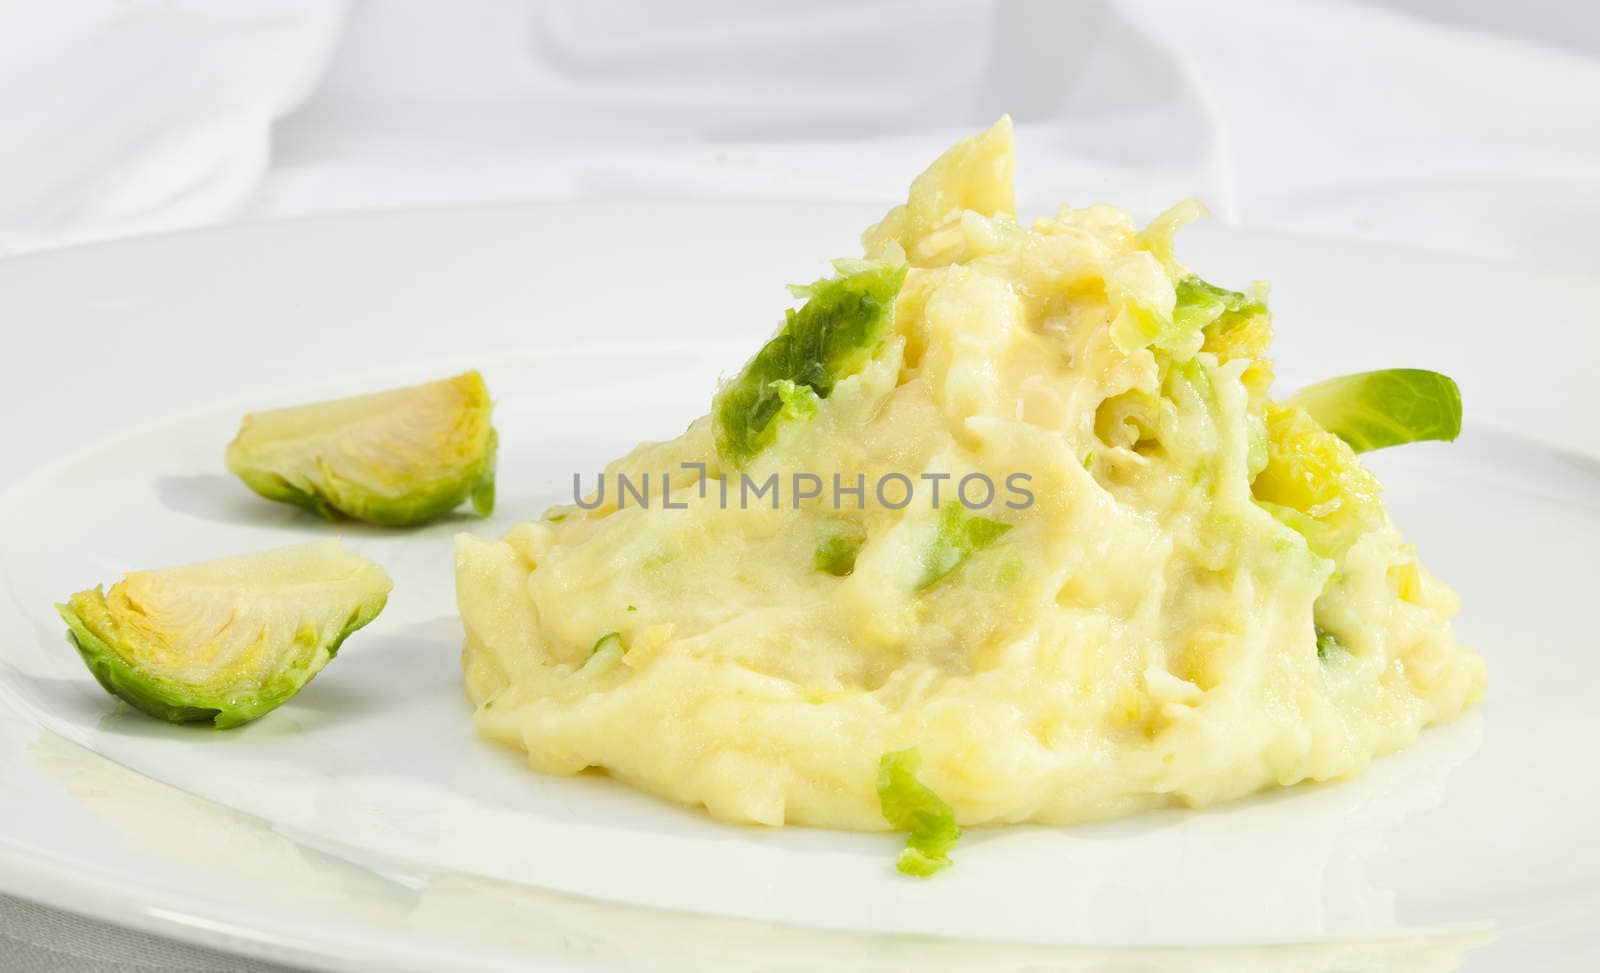 Mashed potatoes with cabbage by hanusst